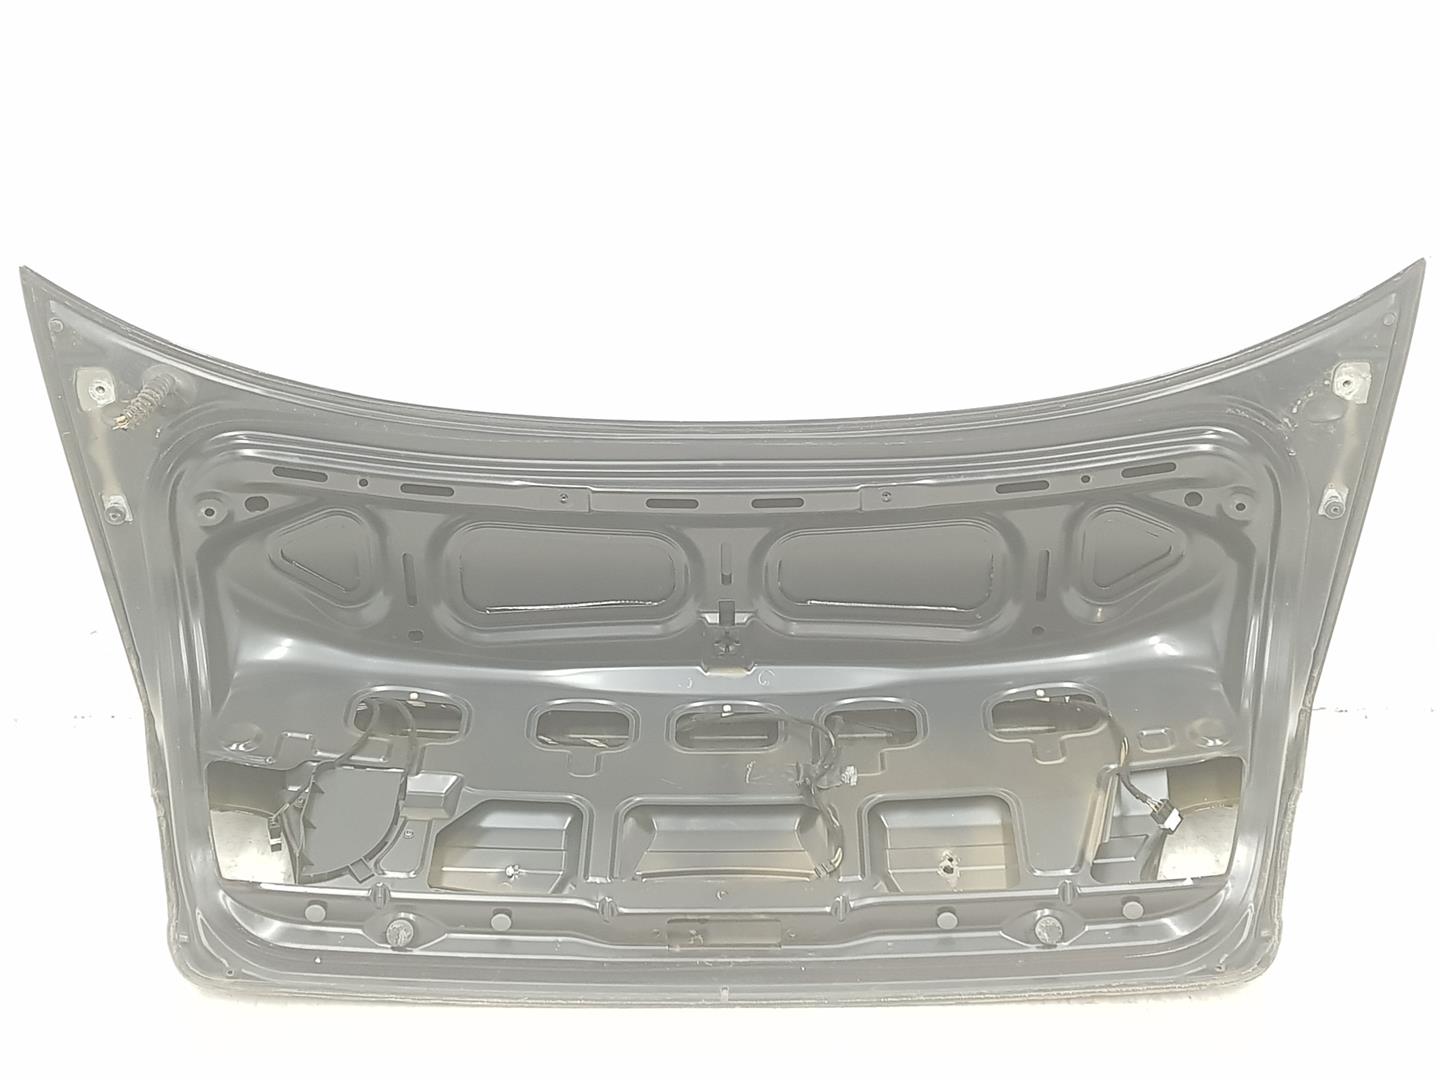 BMW 3 Series E46 (1997-2006) Bootlid Rear Boot 41627003314 23748294